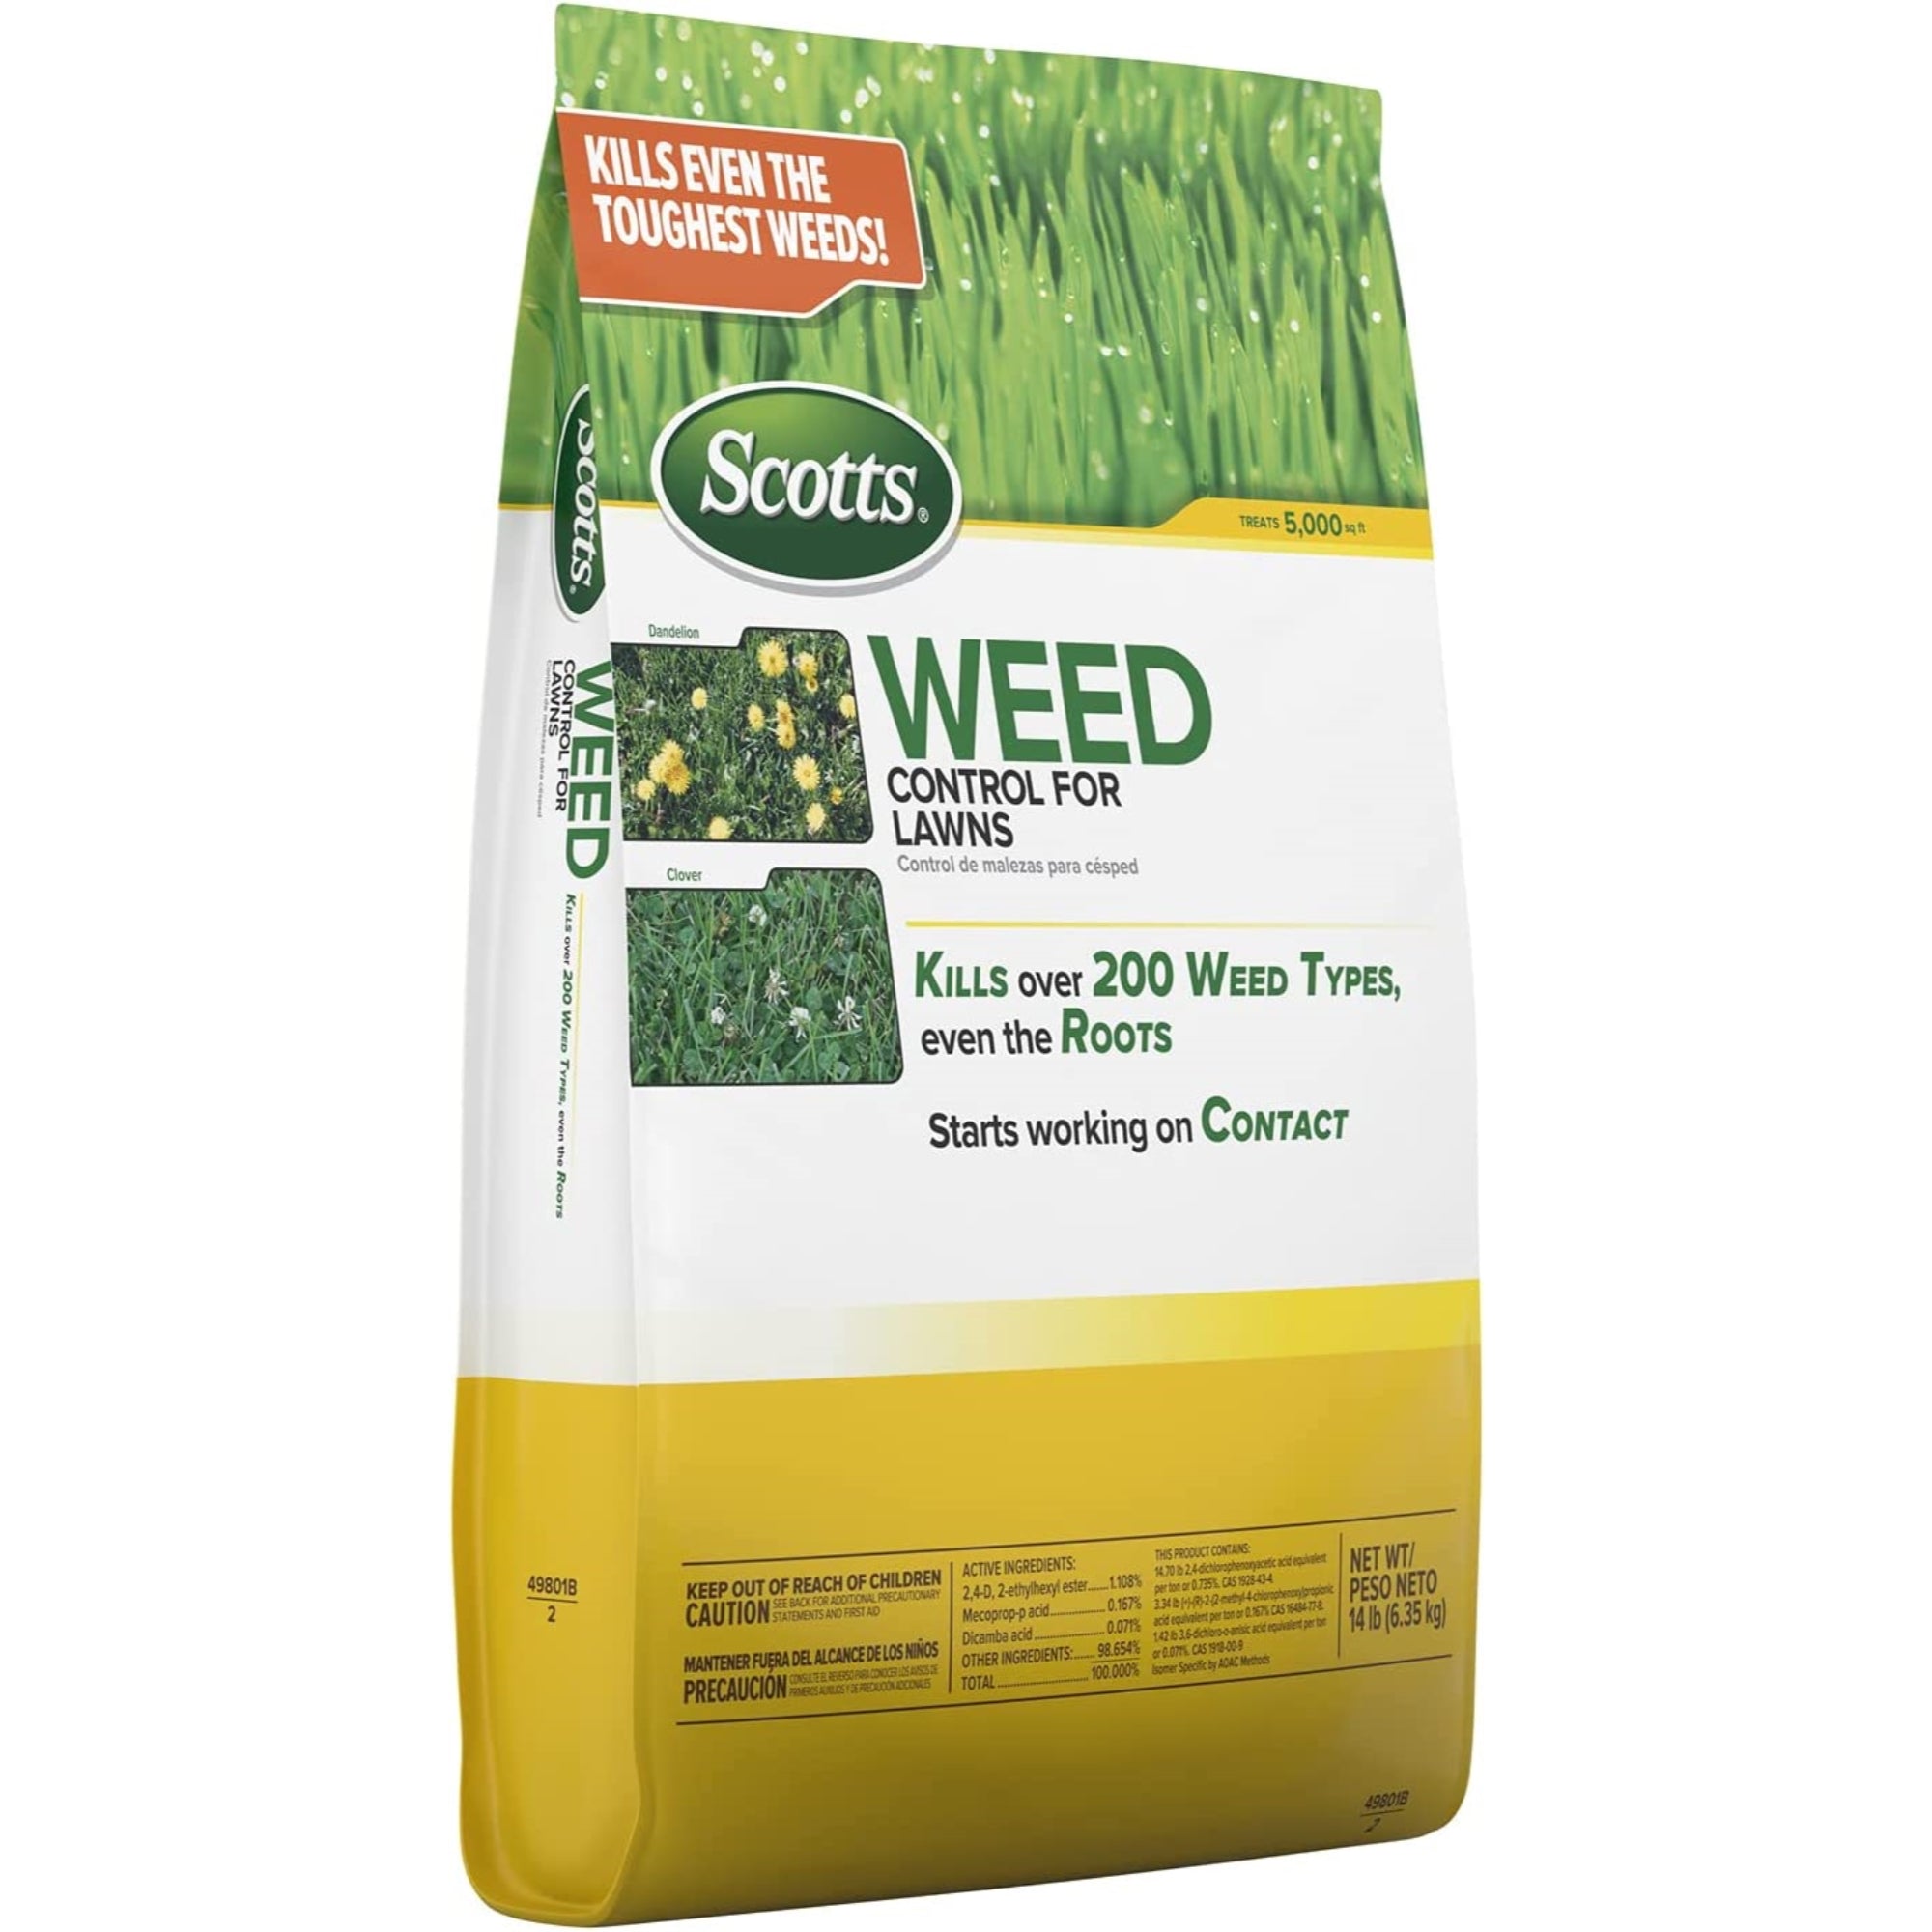 Scotts Granular Weed Control for Lawns, Covers 5,000 SqFt, 14lb Bag